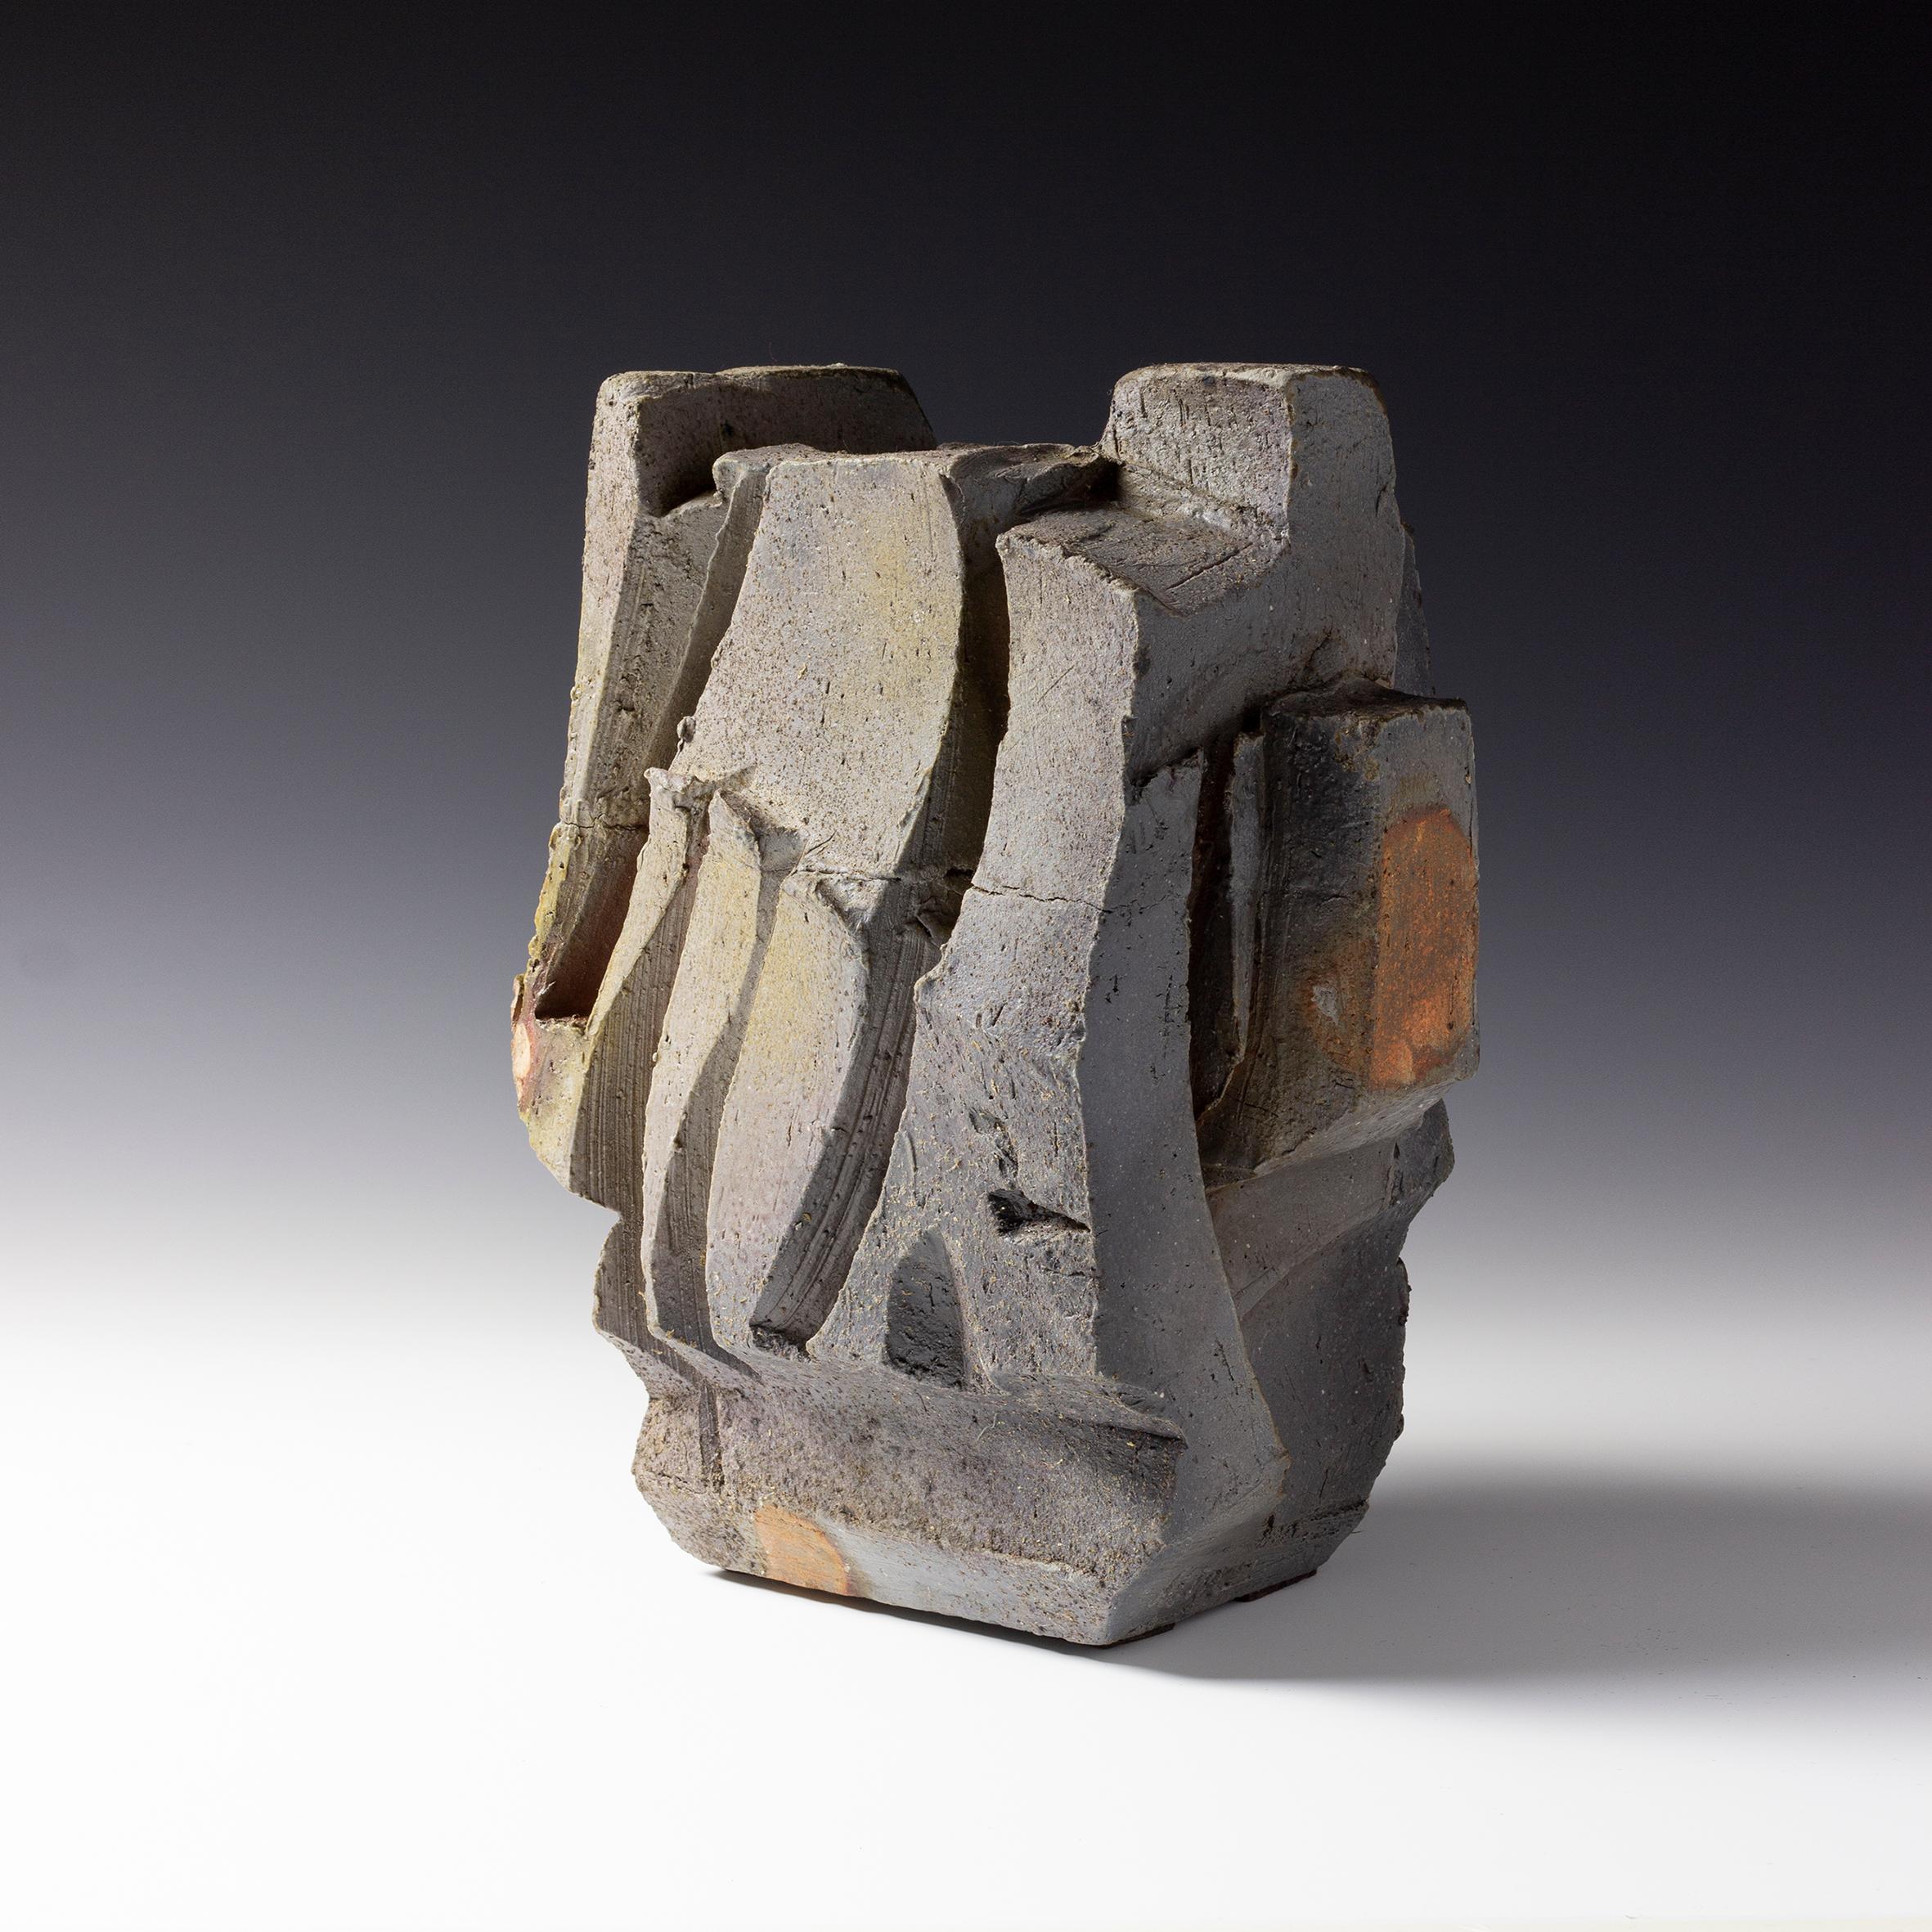 Eric Astoul is a renowned French artist established in La Borne, France. His wood-fired stoneware sculptures are rich in this tension between interior and exterior, an internal surge which seems to be able to shatter the work, its erected walls,